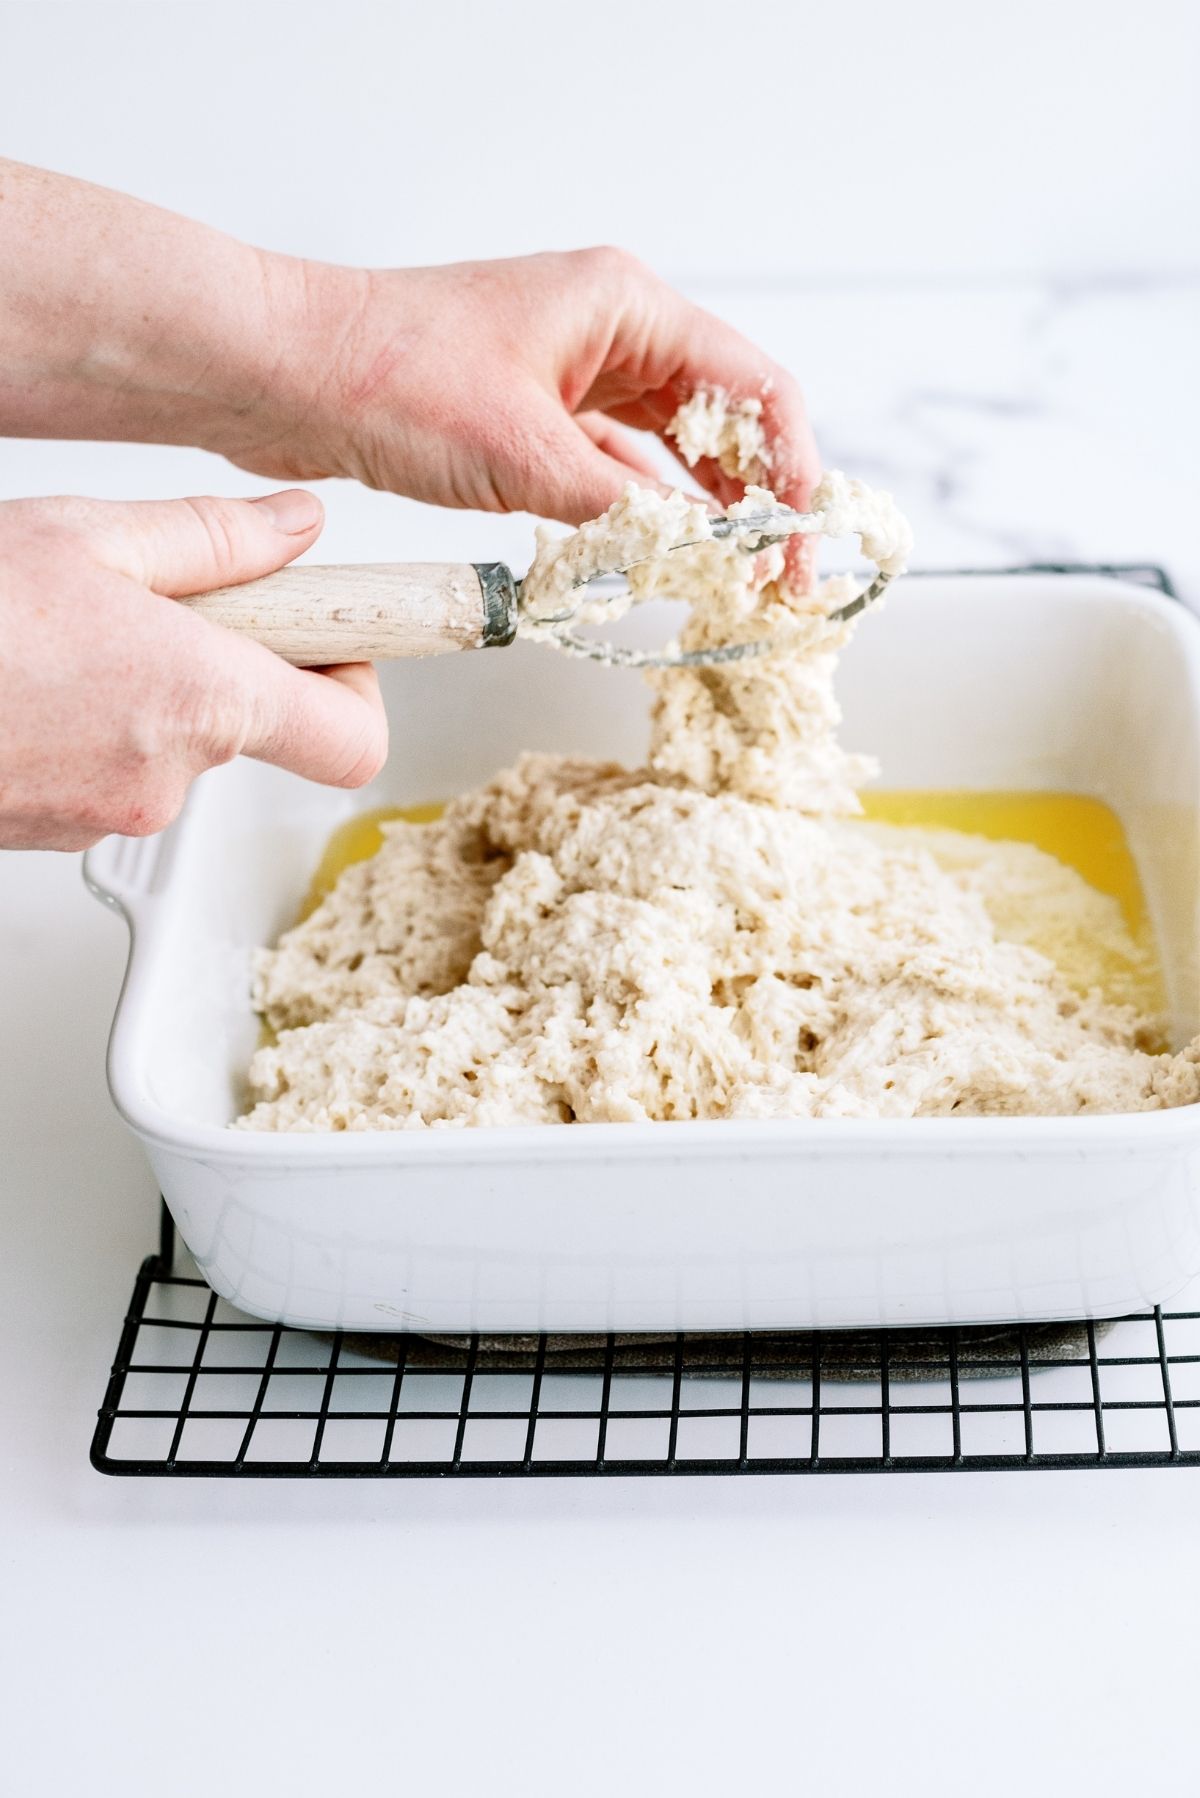 Spreading the biscuit dough into the prepared pan